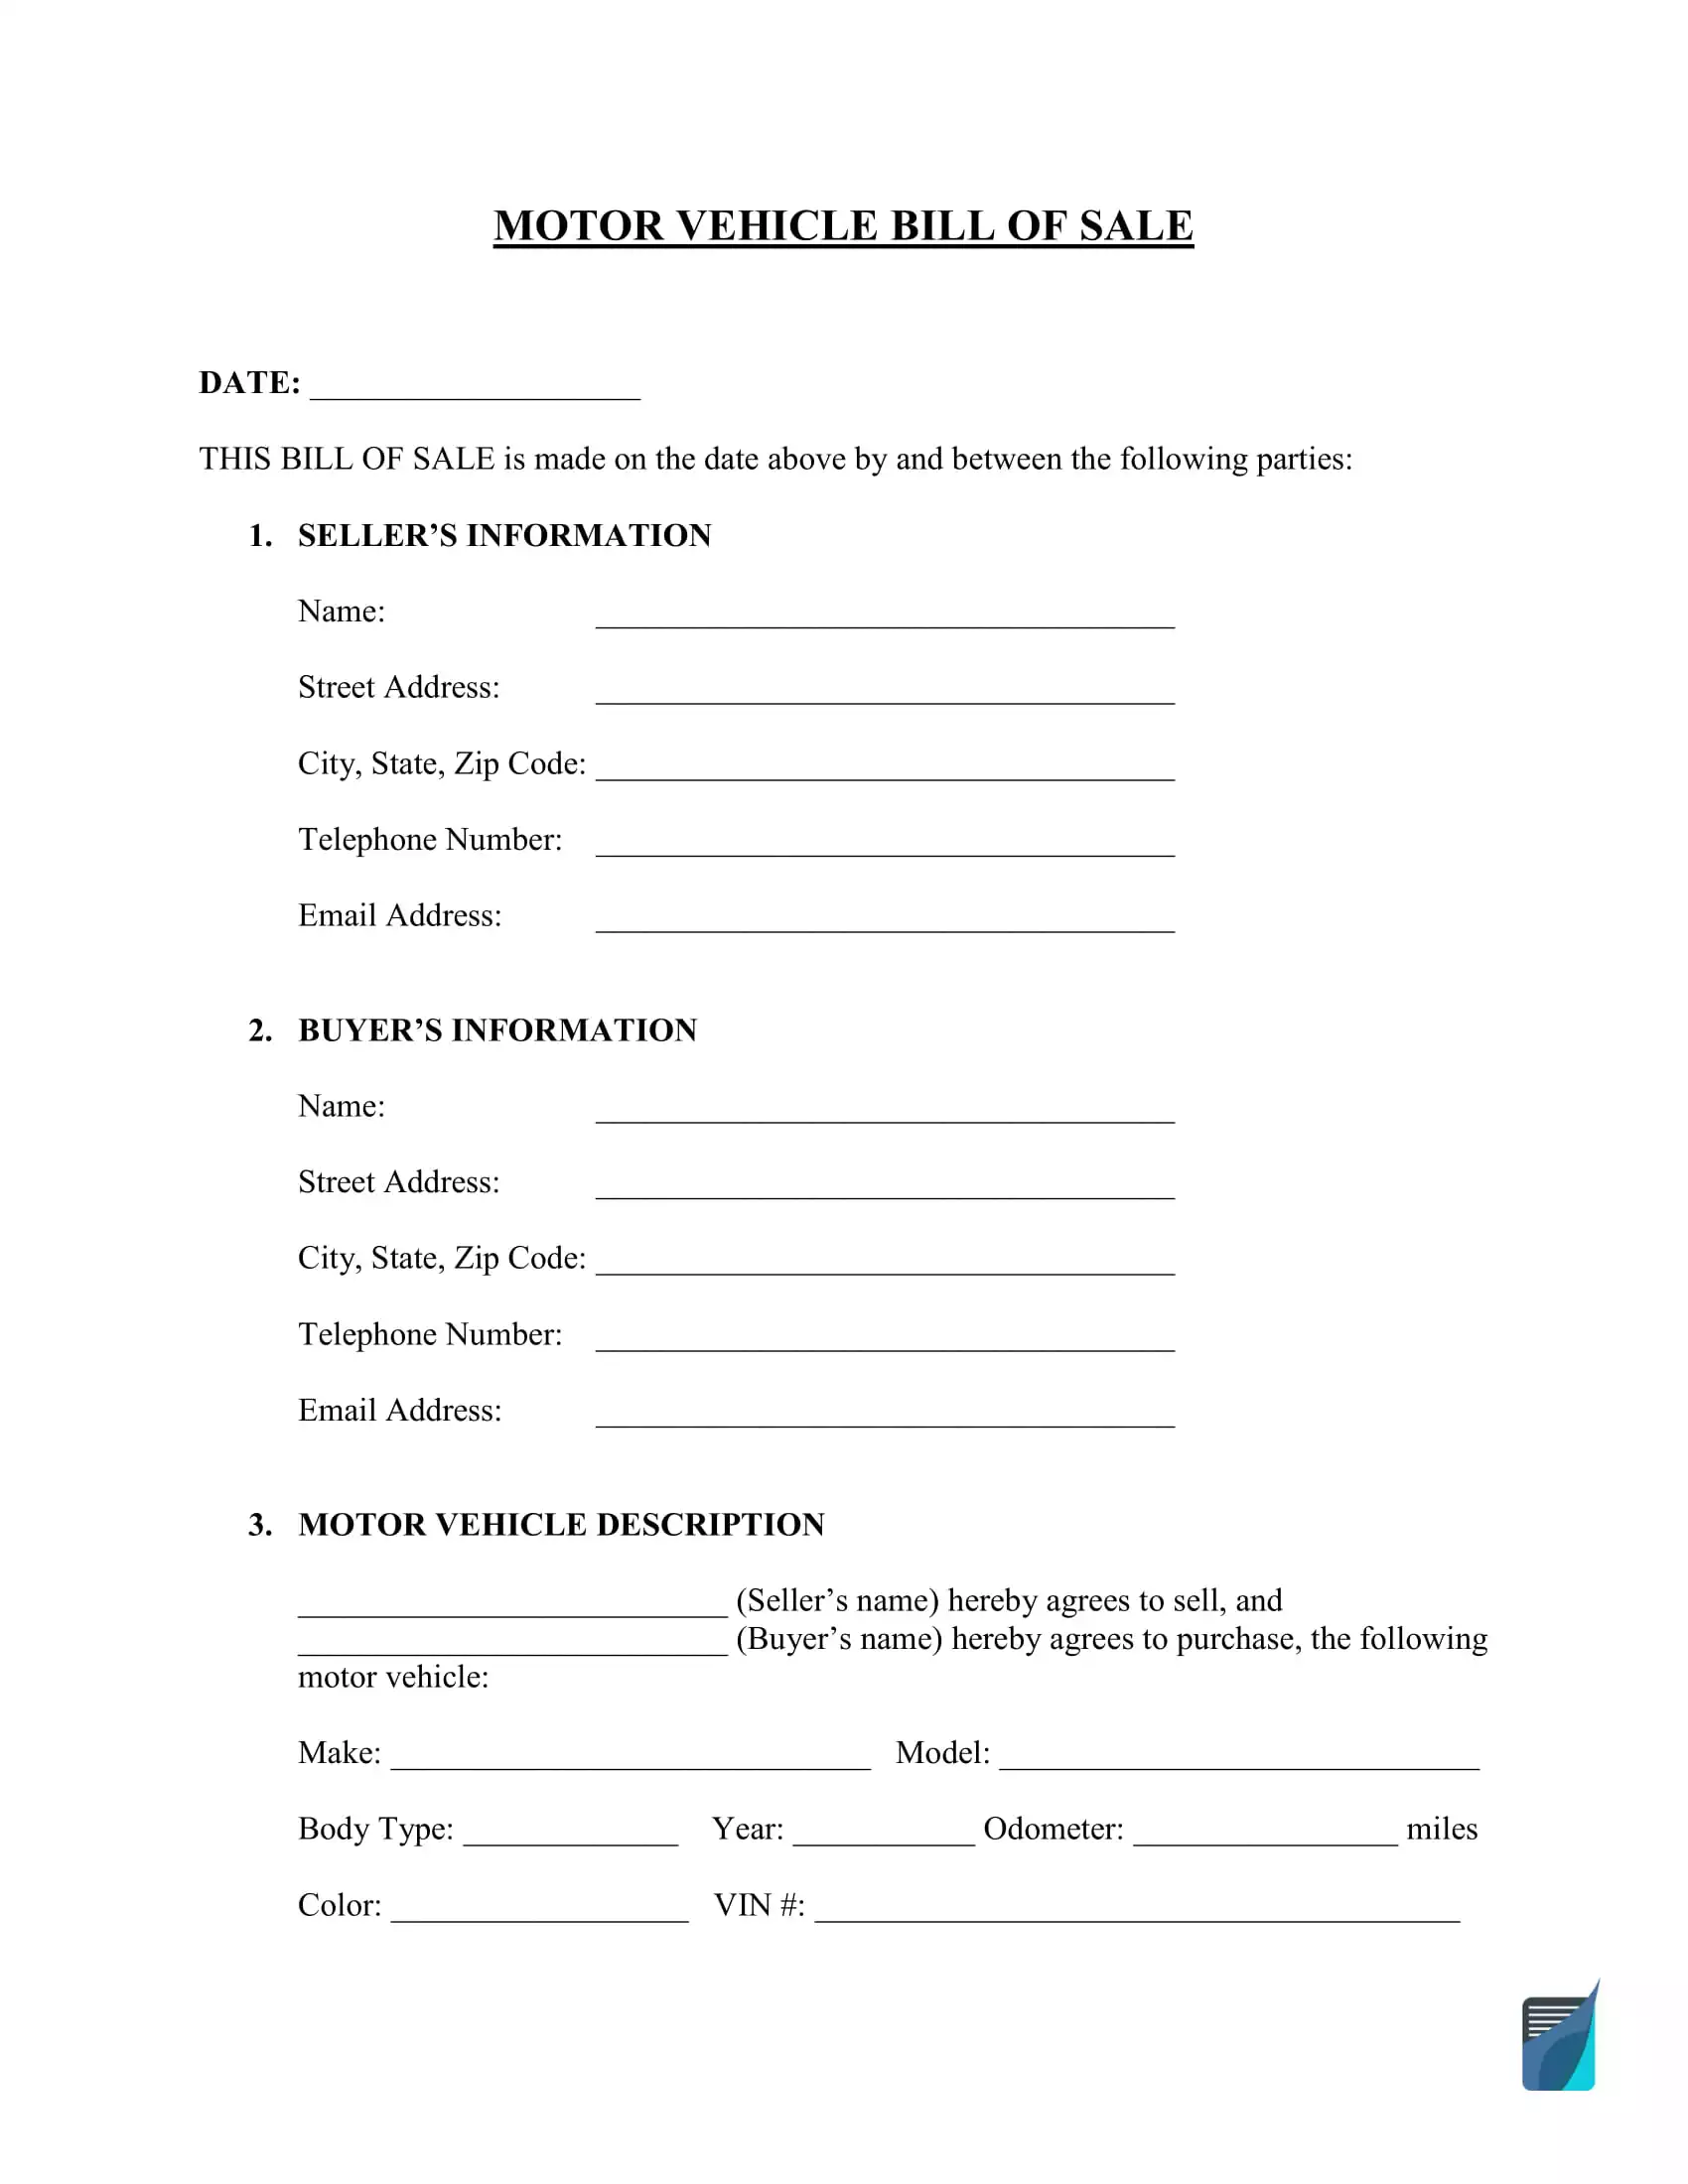 Bill of Sale Template - Free PDF  Word Forms - FormsPal